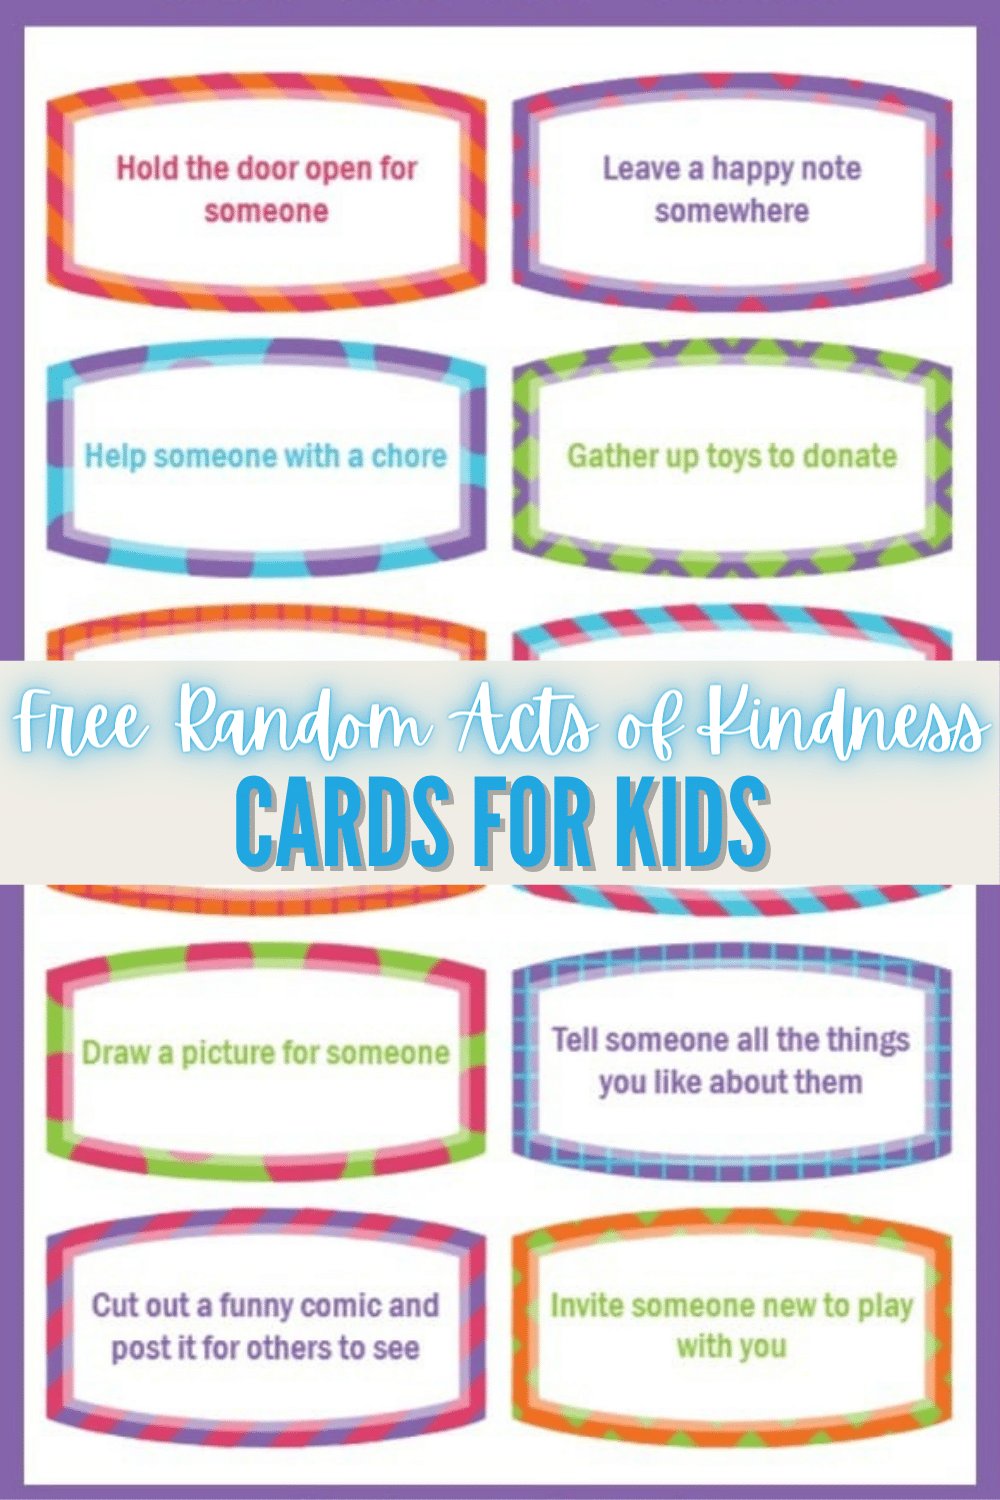 These random acts of kindness cards for kids are an easy way to inspire your children to be kind, charitable, and considerate of others. #randomactsofkindness #forkids #parentingtips #kindness via @wondermomwannab